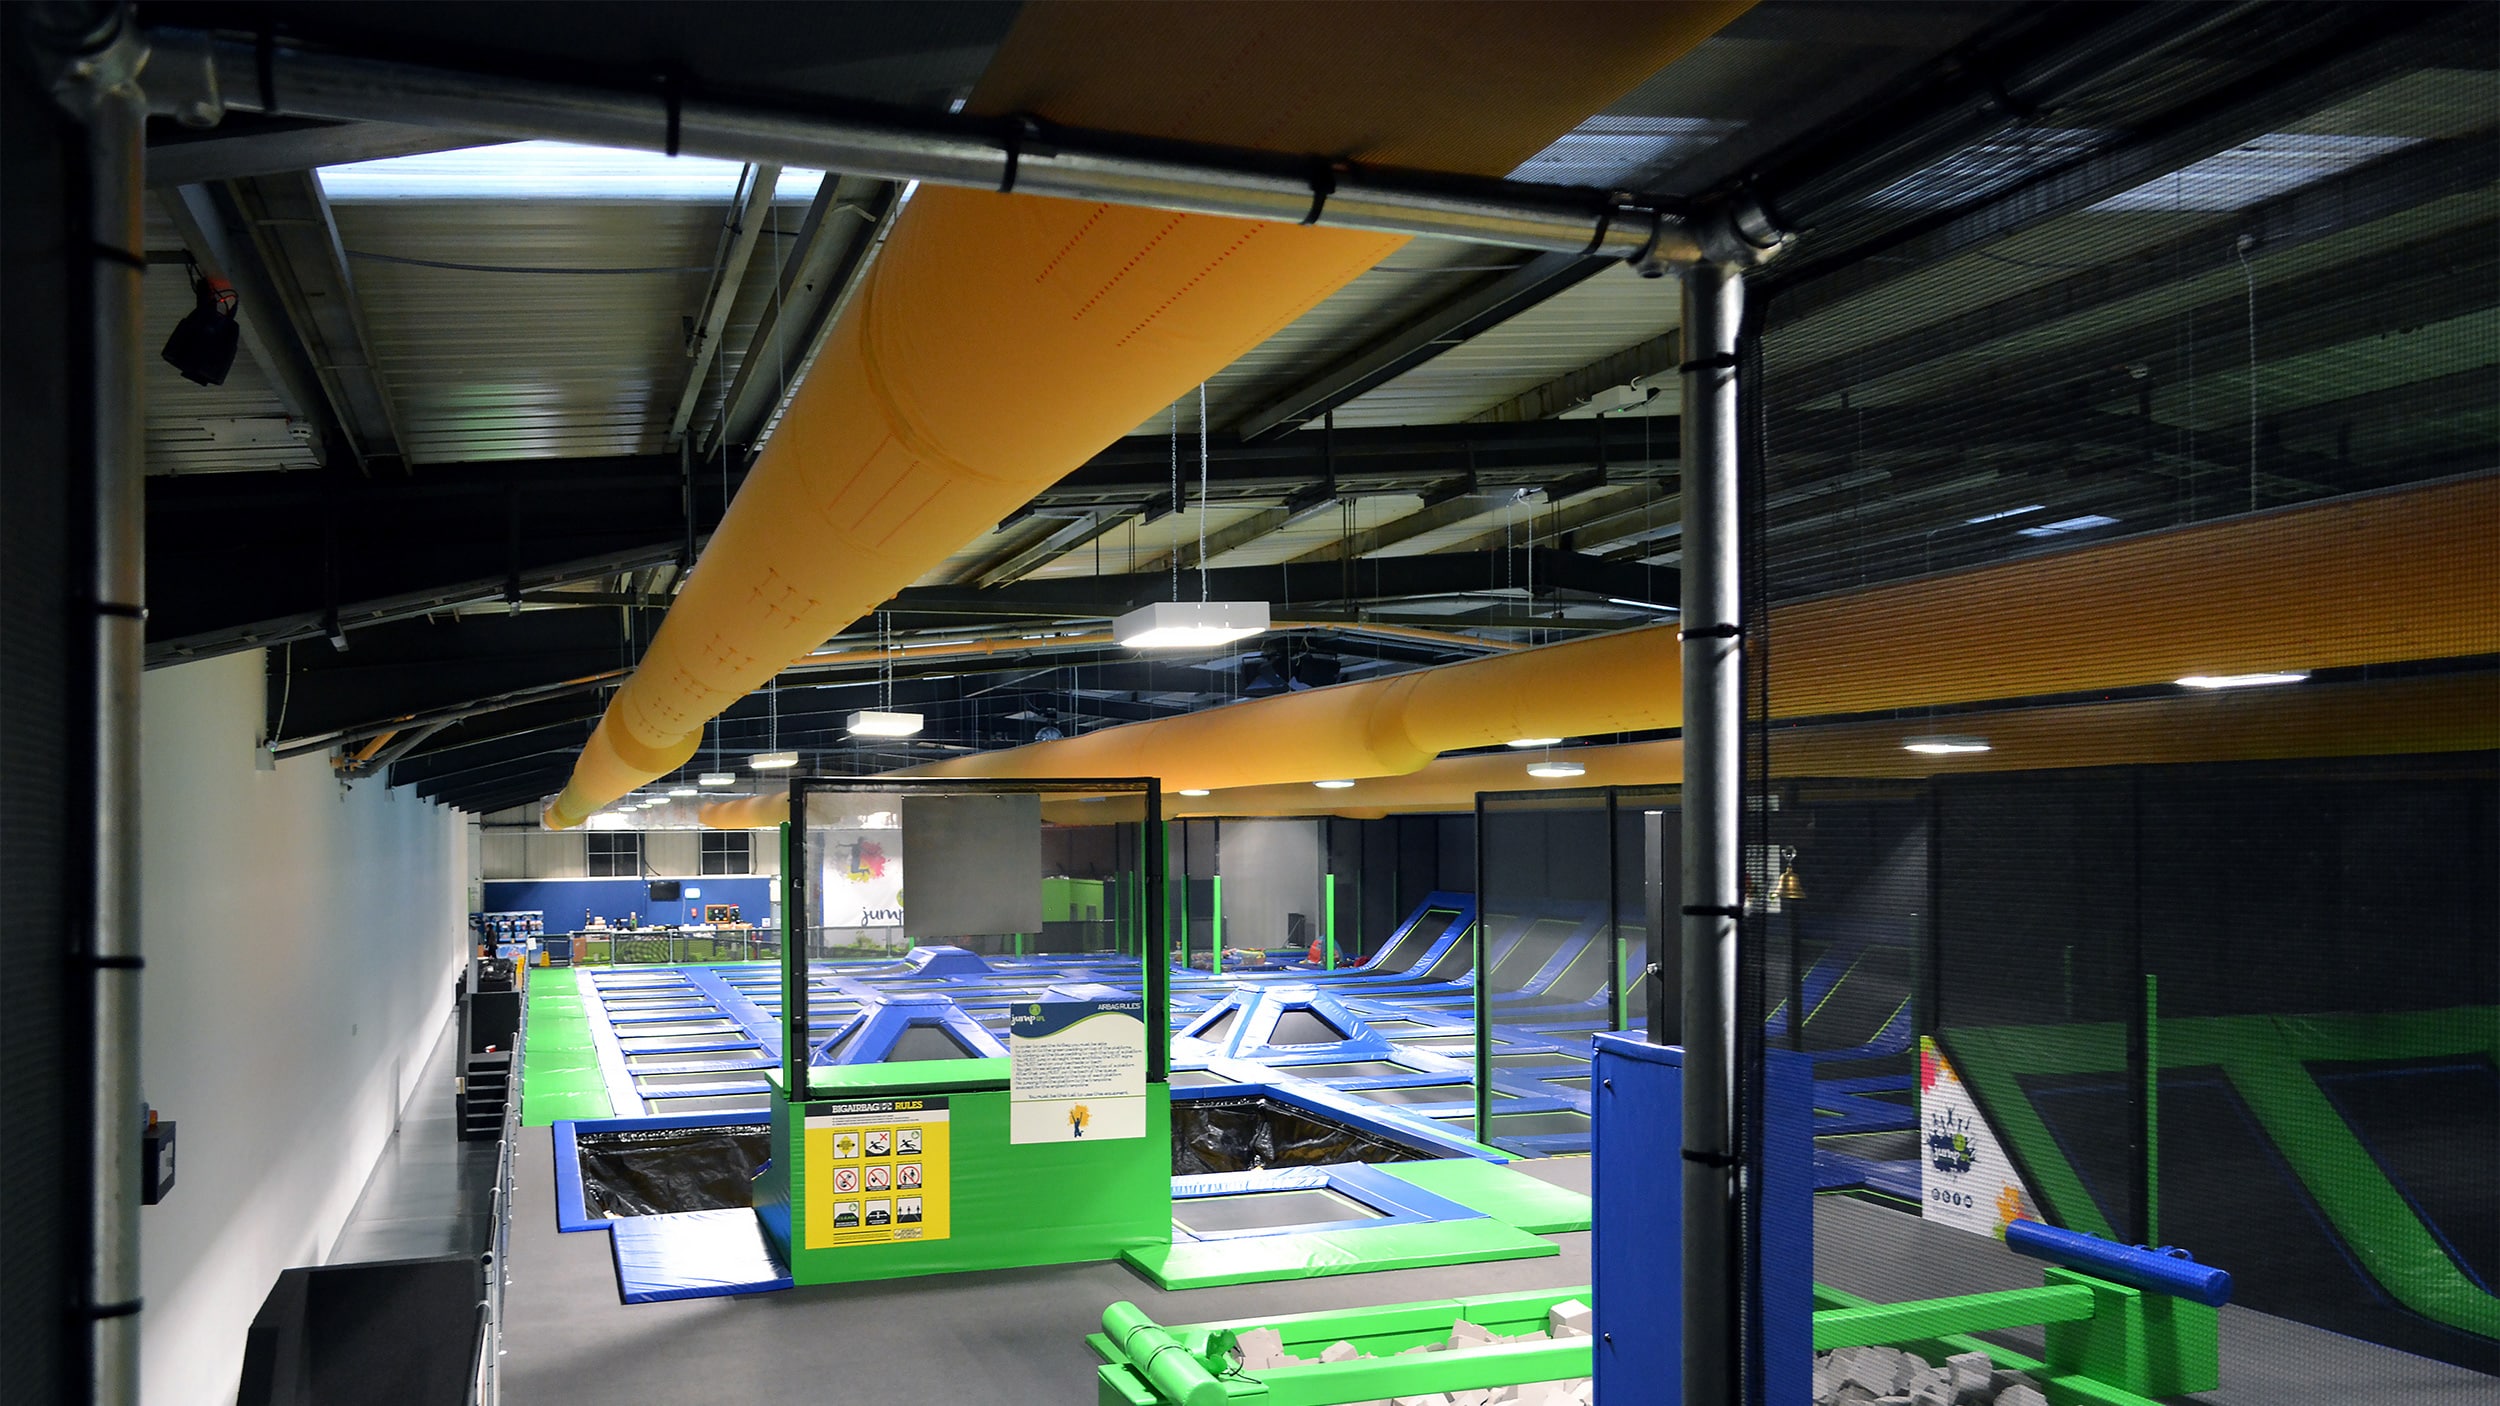 Commercial textile ducts for trampoline park